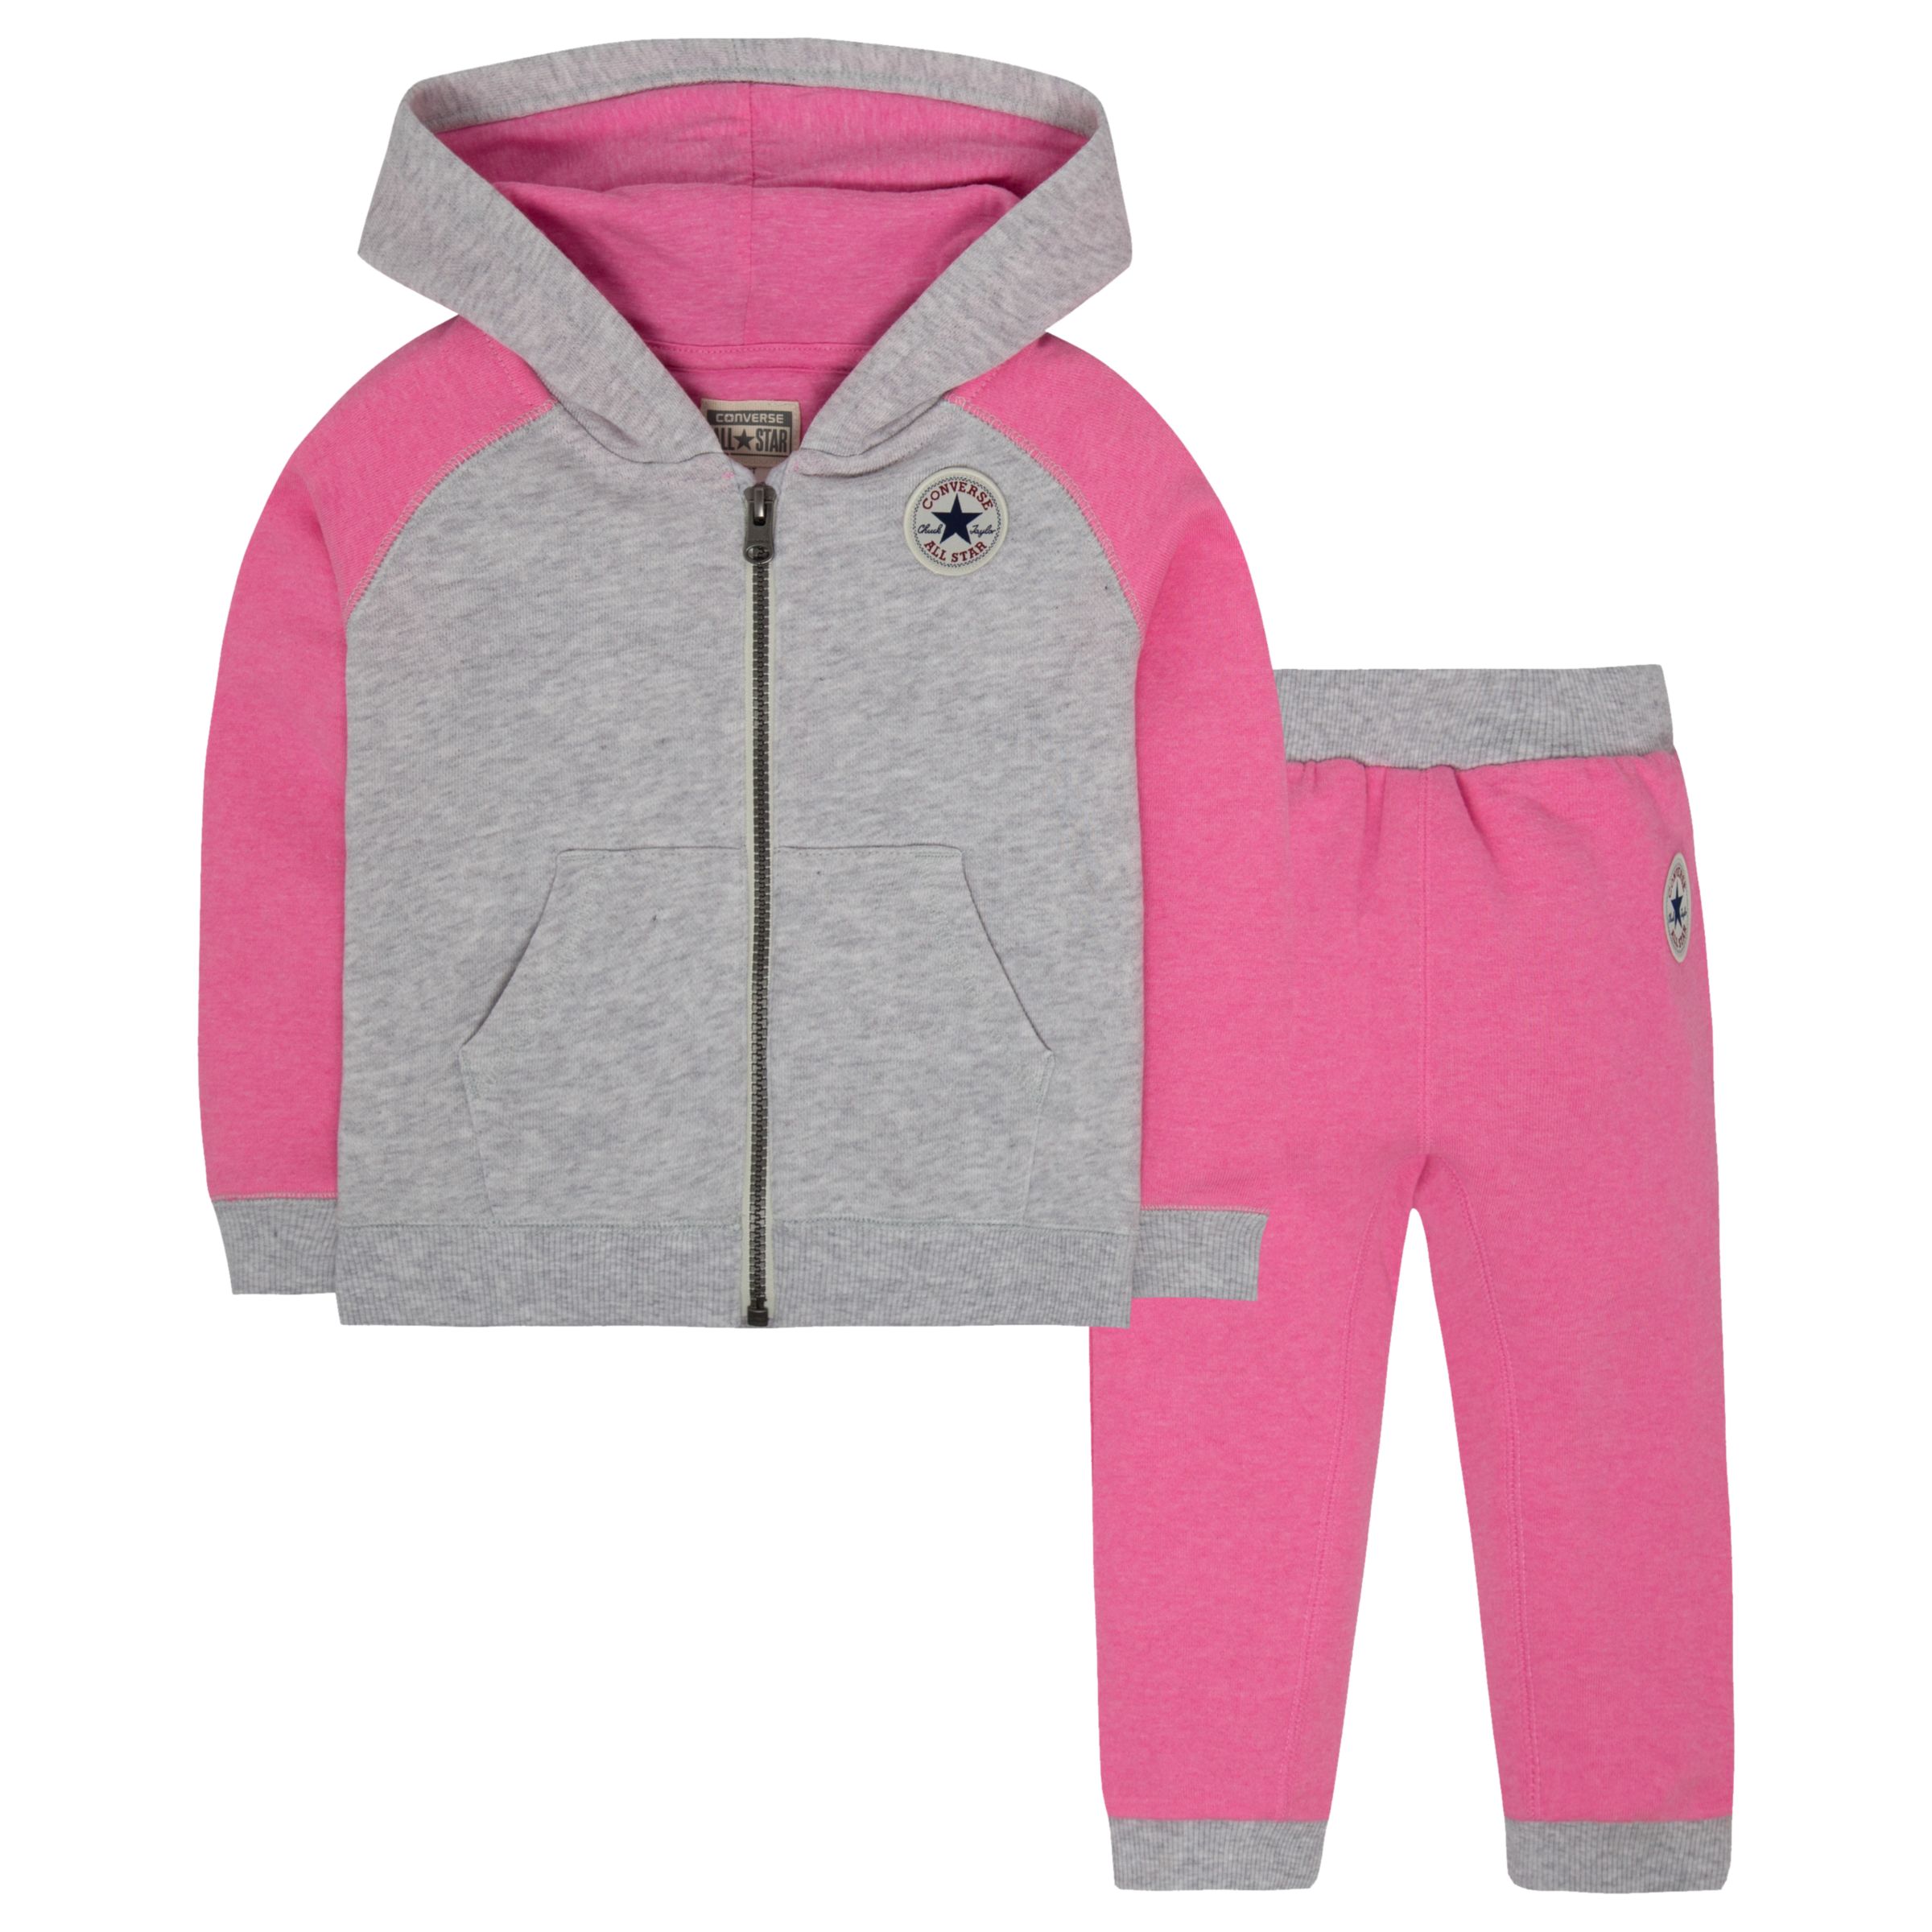 converse baby tracksuit gift set